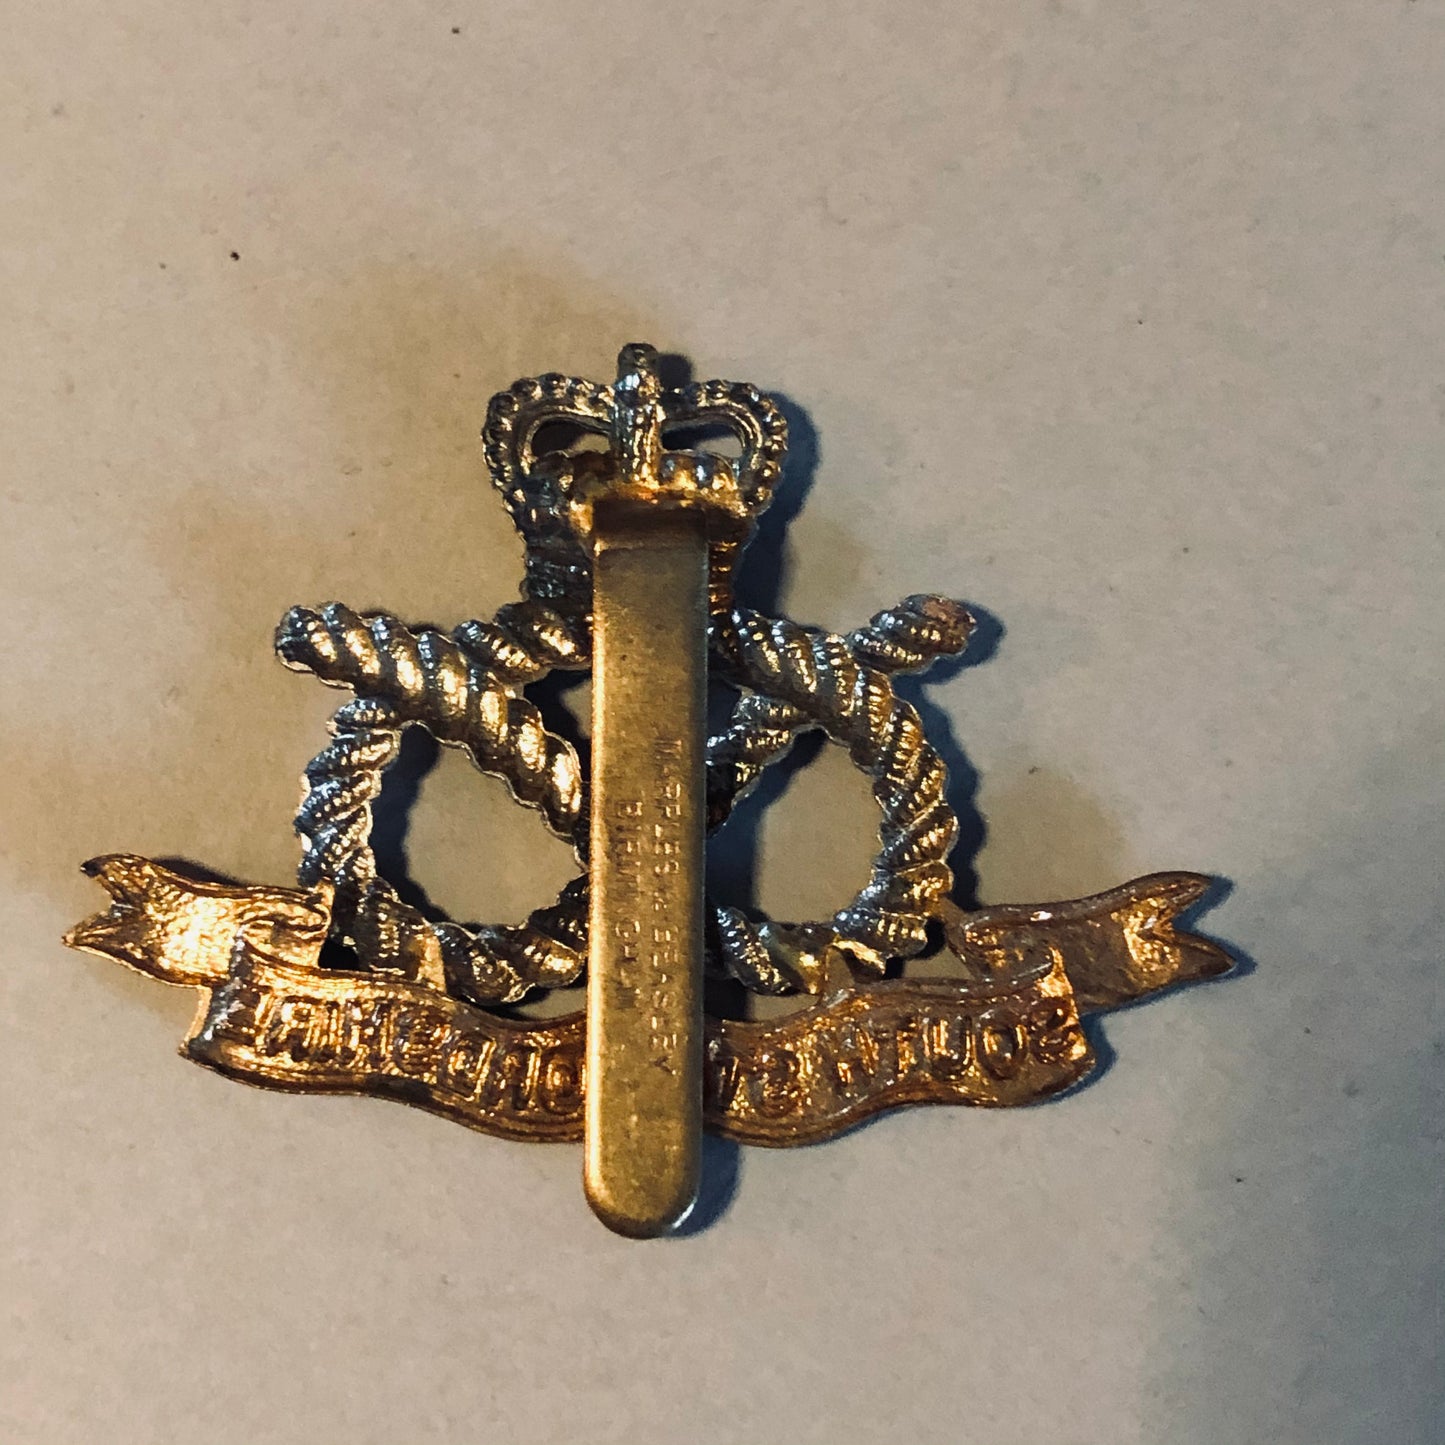 The Director Madison - Vintage Military Badge For South Staffordshire